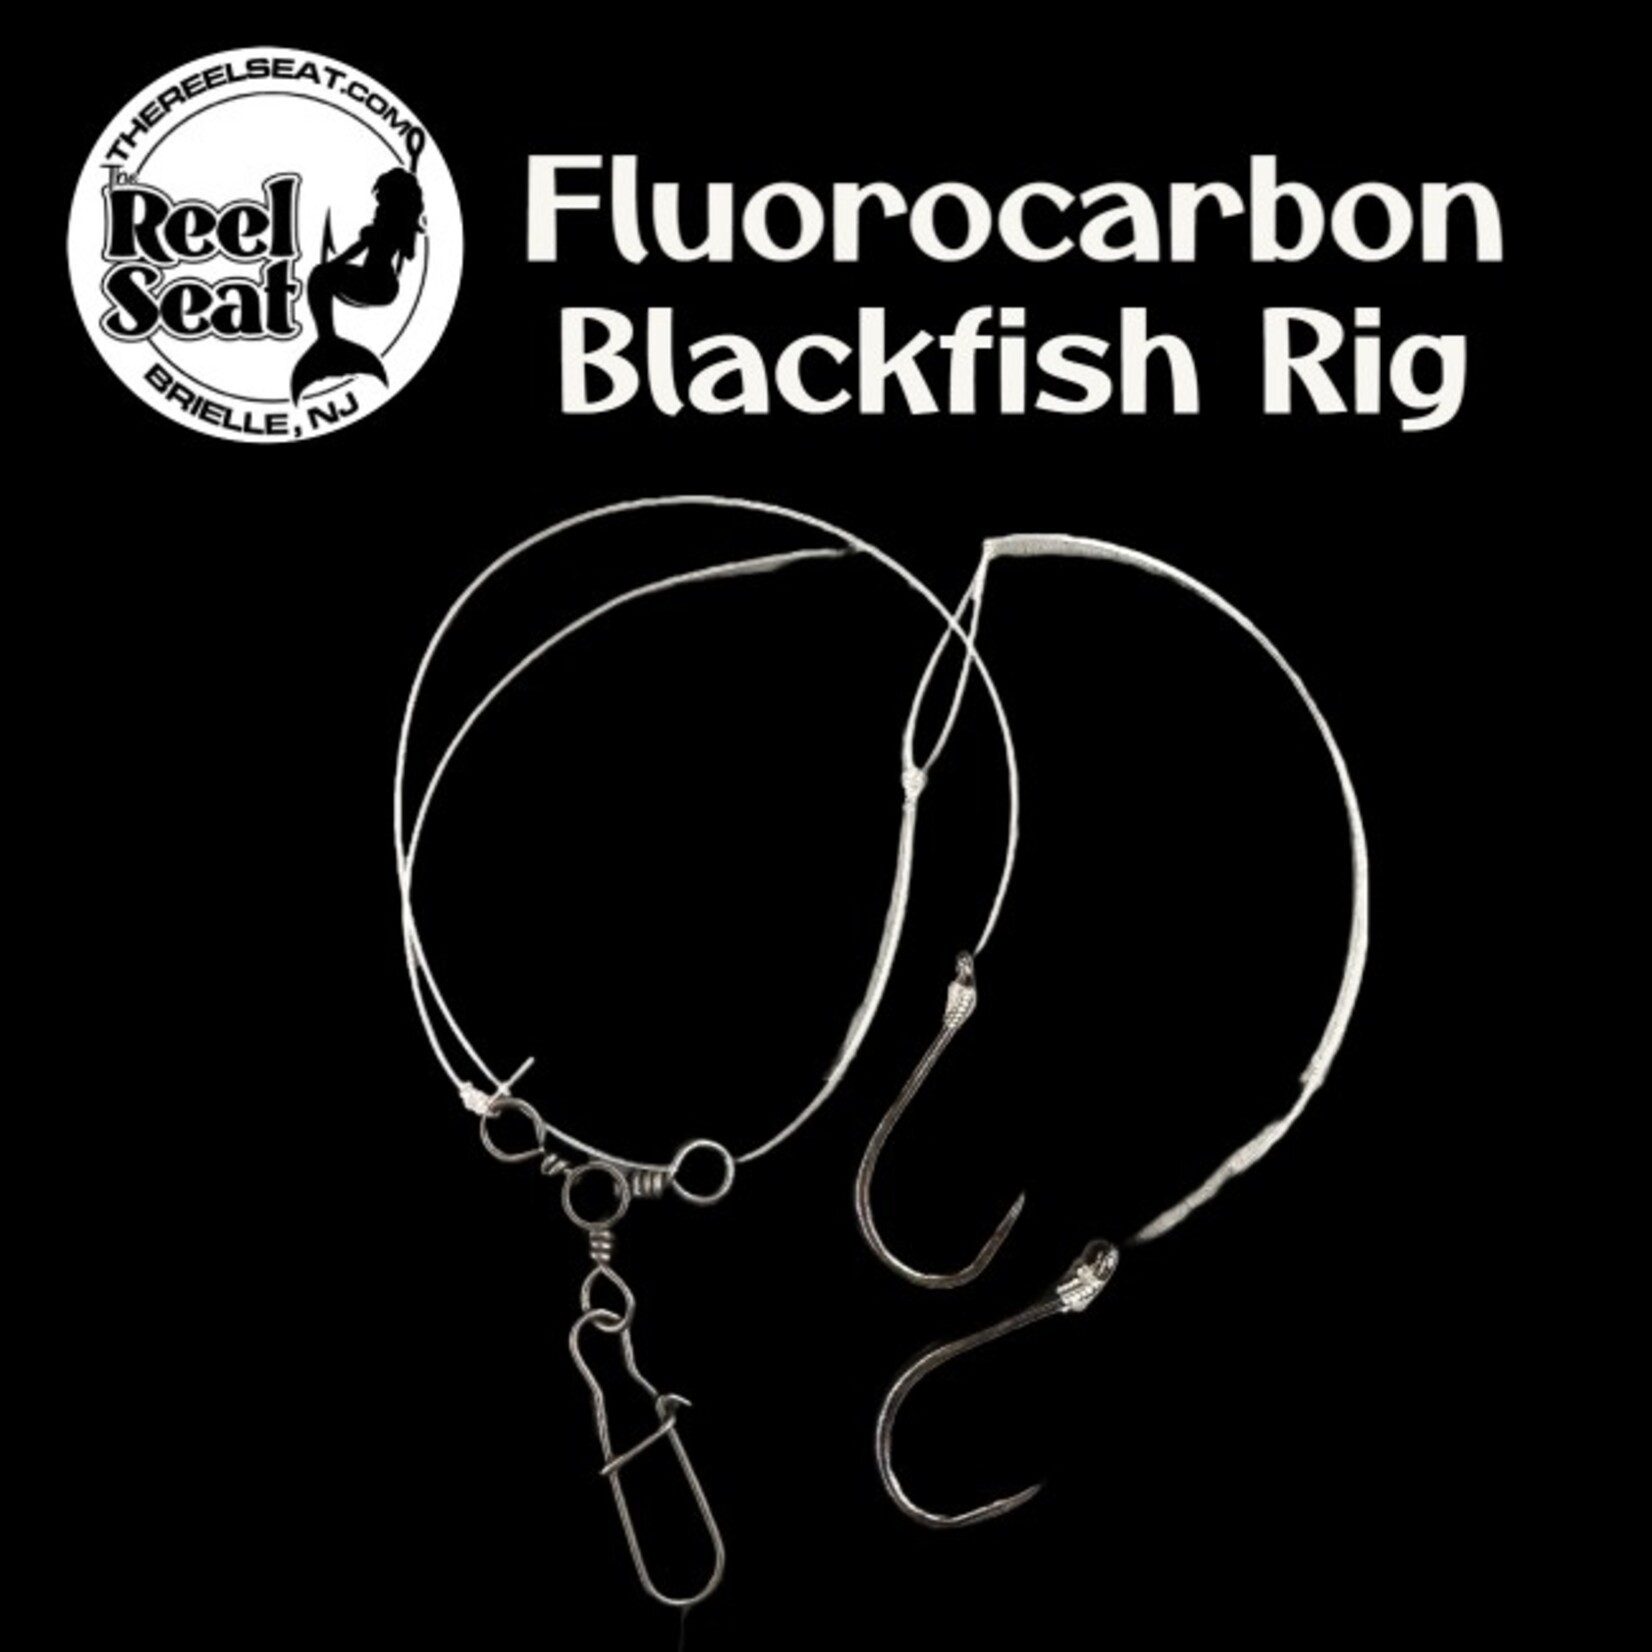 The Reel Seat RS Fluorocarbon Blackfish Rig